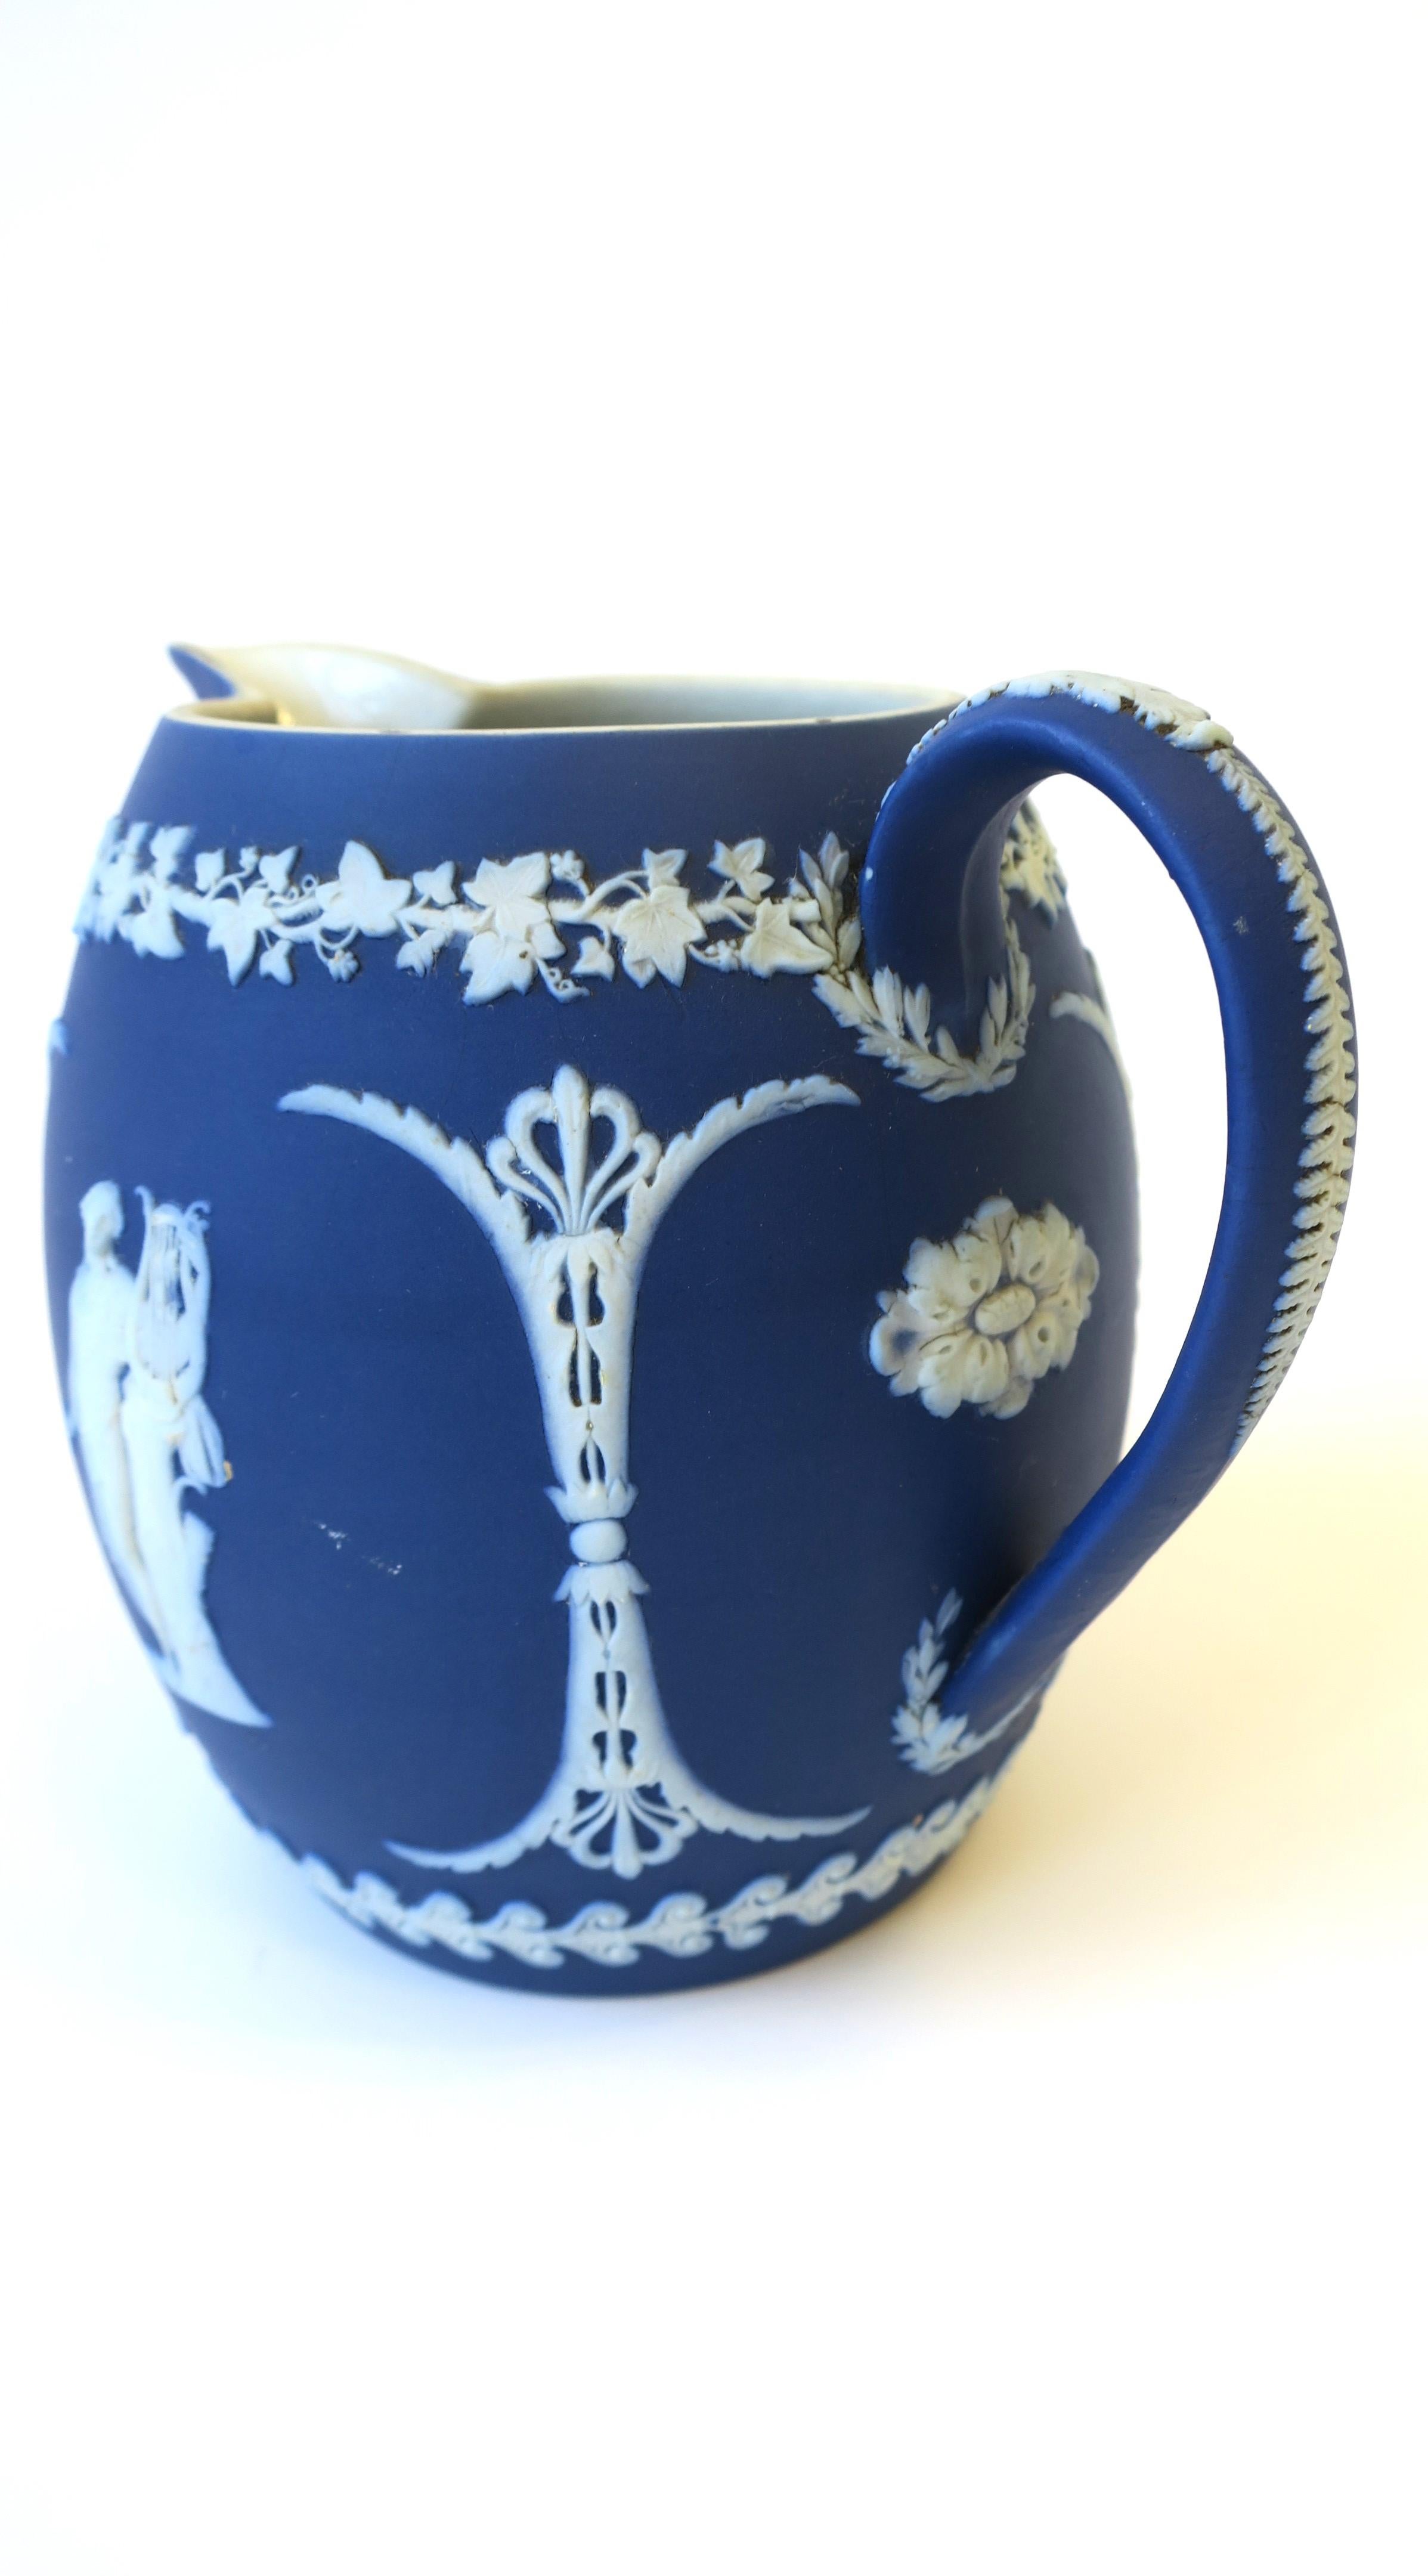 Wedgwood Jasperware Blue and White Pitcher or Vase Neoclassical, England 19th C For Sale 8